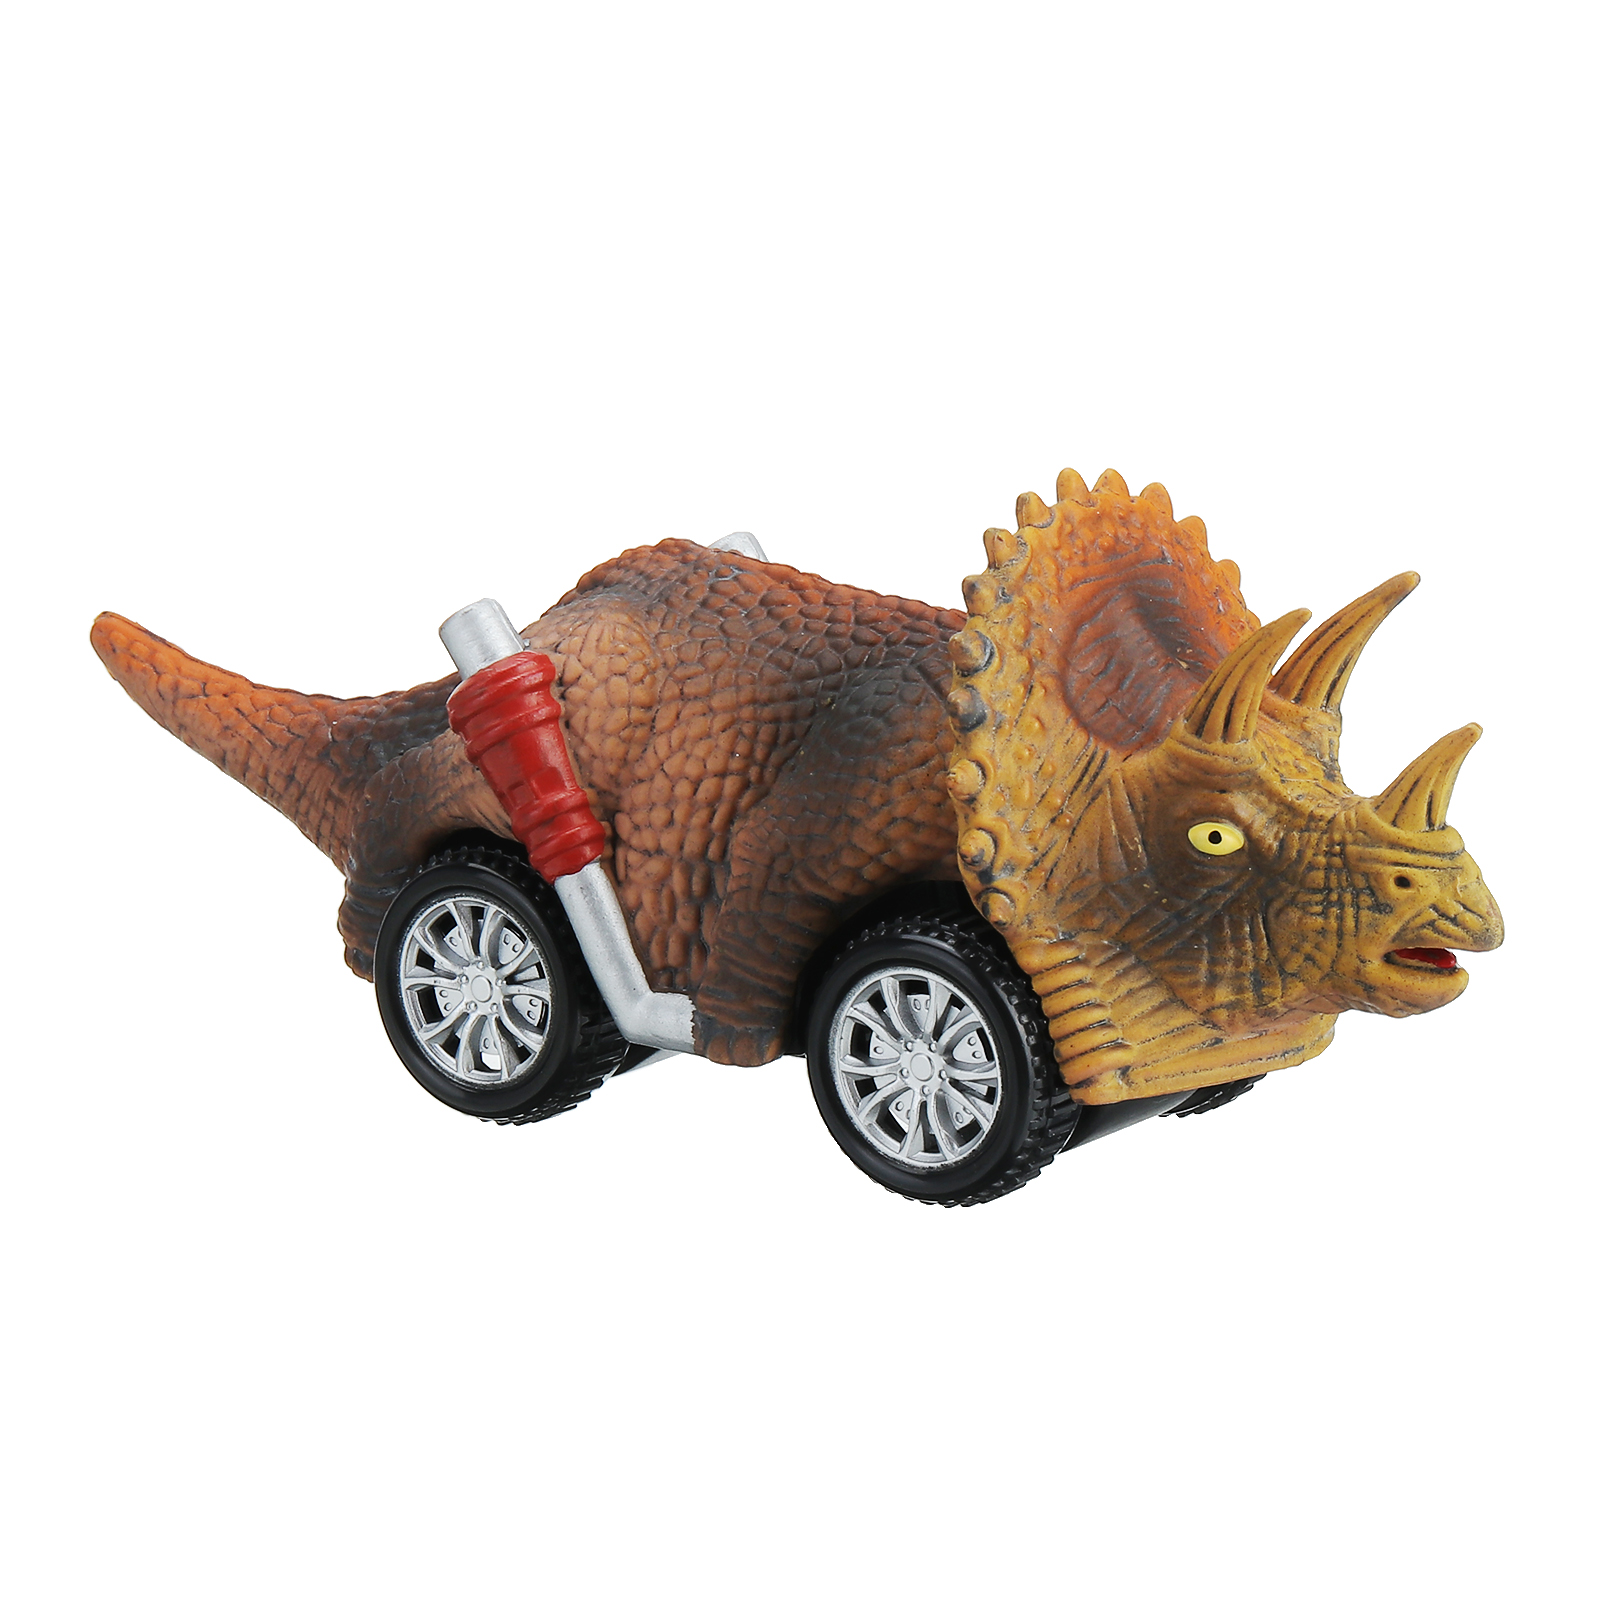 Pickwoo-Dinosaur-Toys-Cars-Inertia-Vehicles-Toddlers-Kids-Dinosaur-Party-Games-with-T-Rex-Dino-Toys--1895631-10